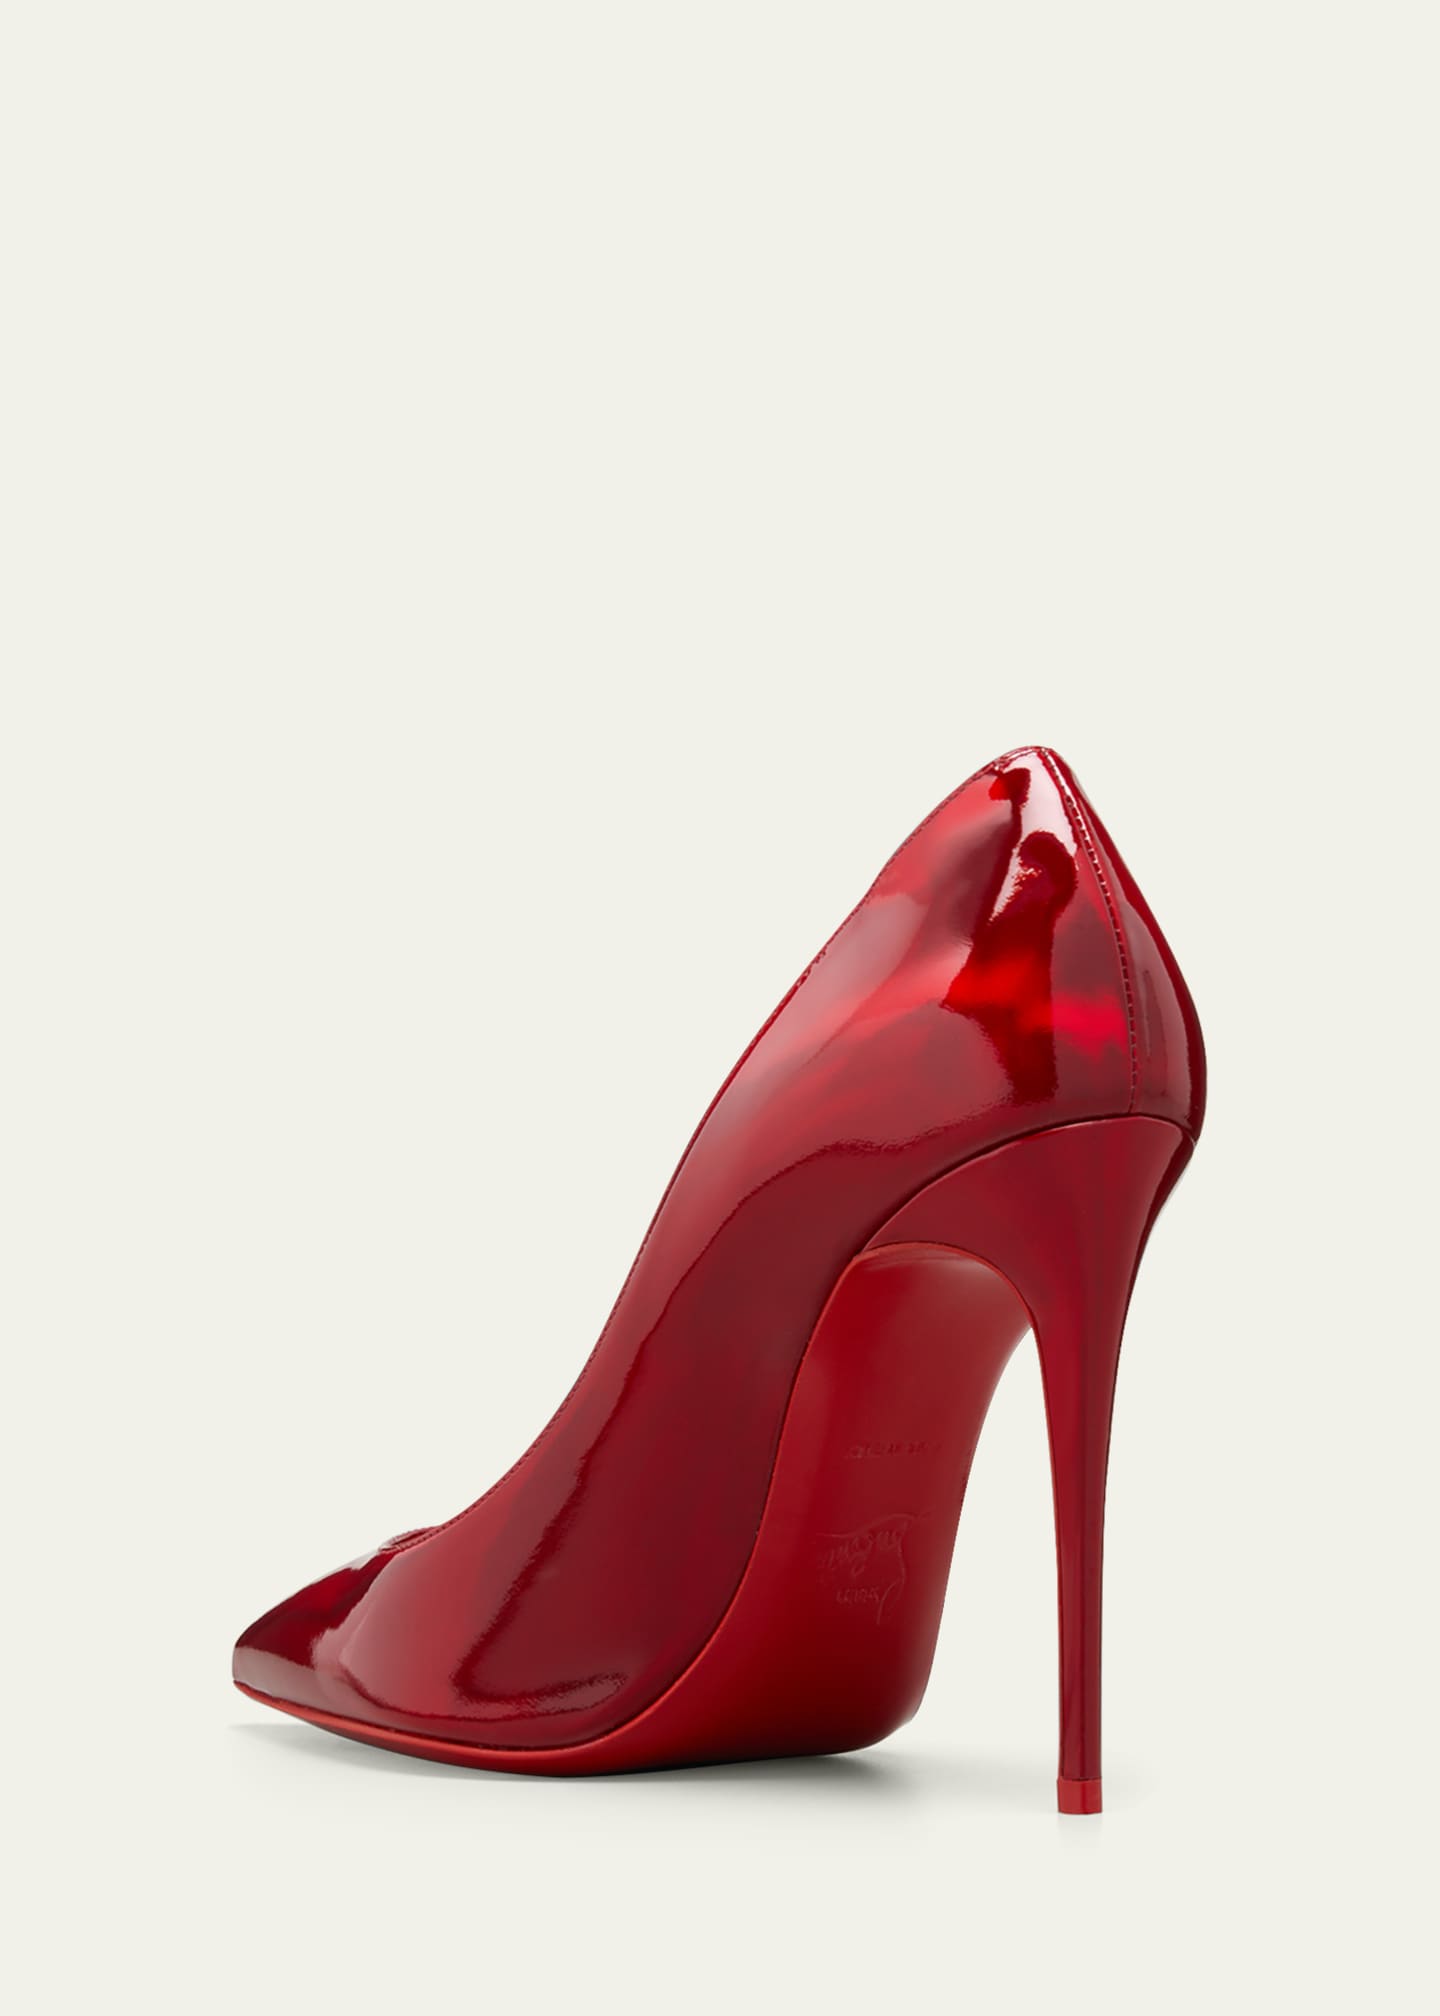 Christian Louboutin, Kate 100 red patent pumps